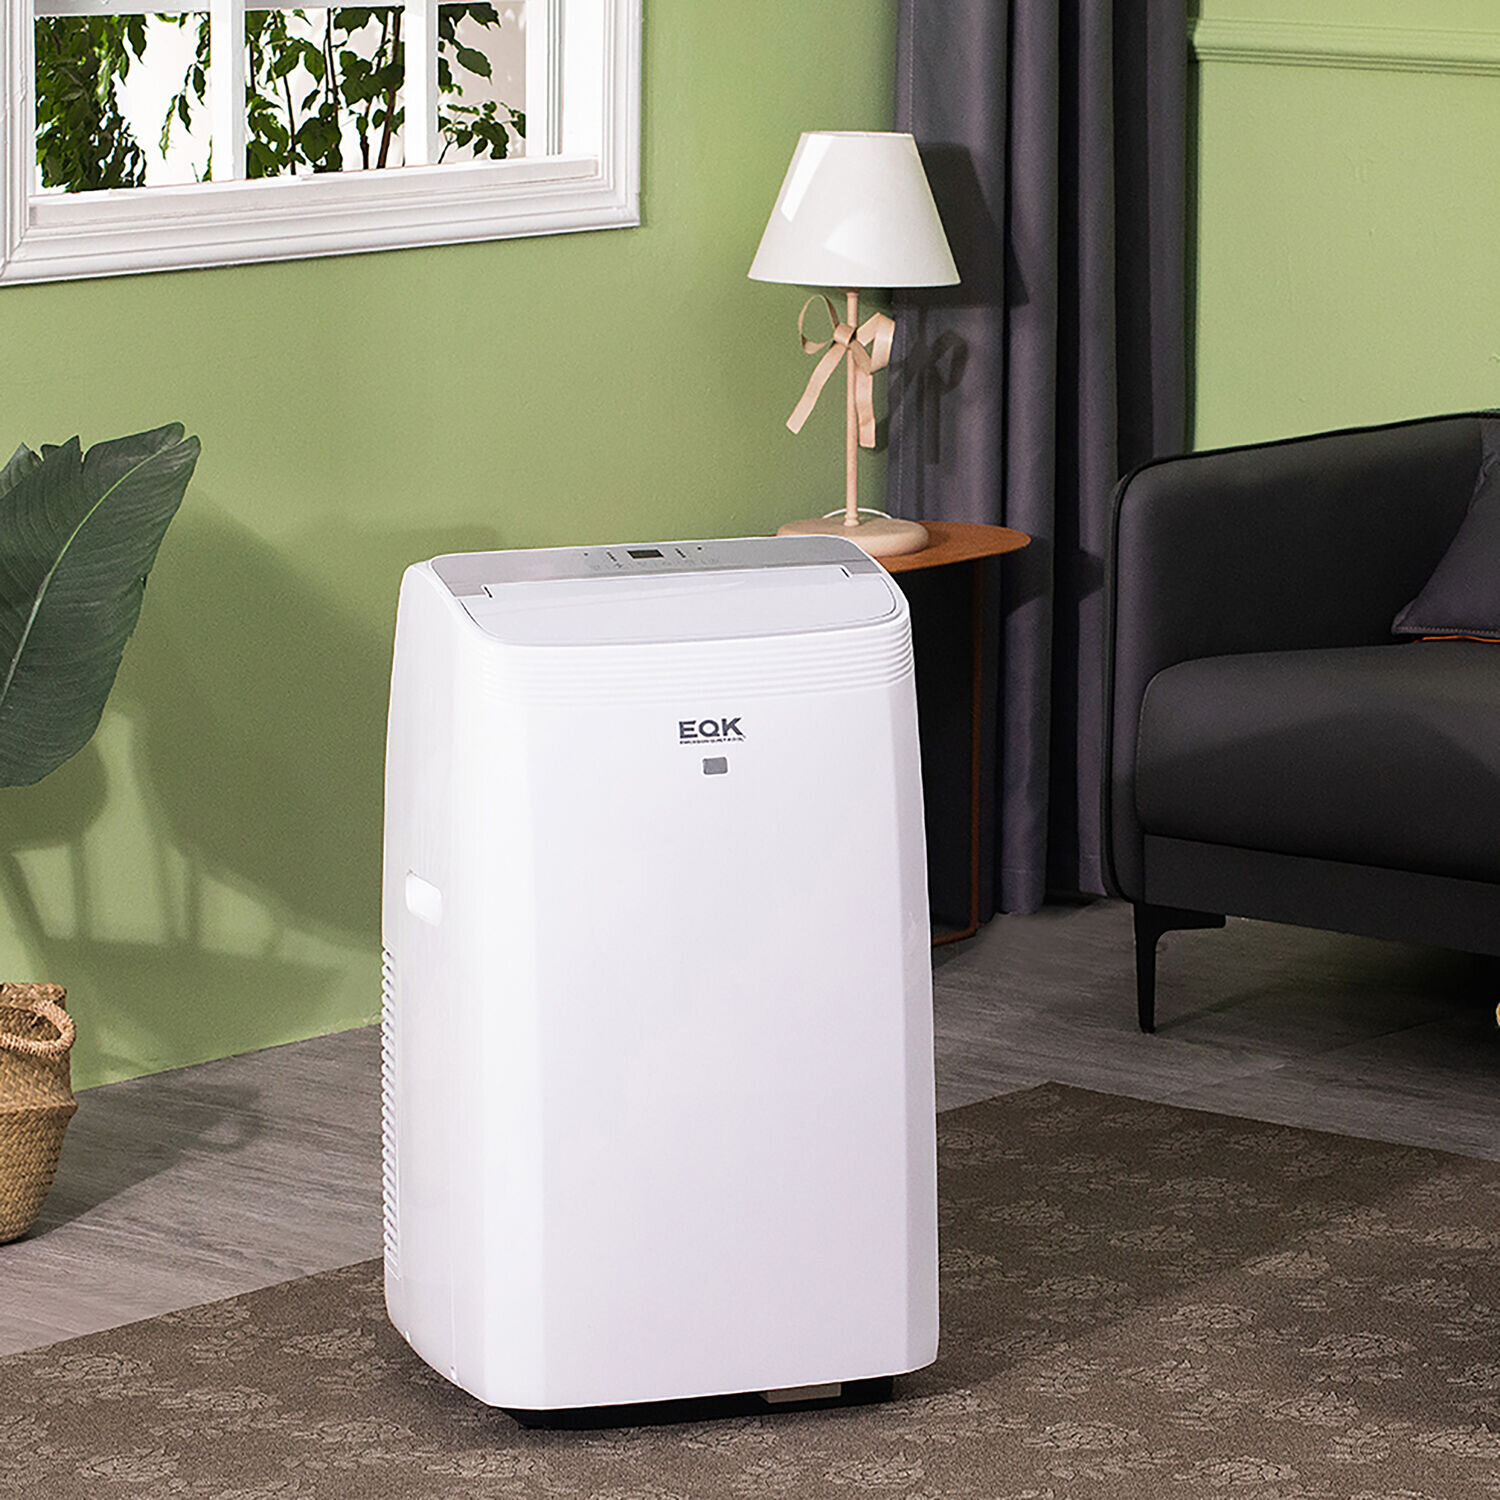 10,000 BTU 4 in 1 Smart Portable Air Conditioner with Heat